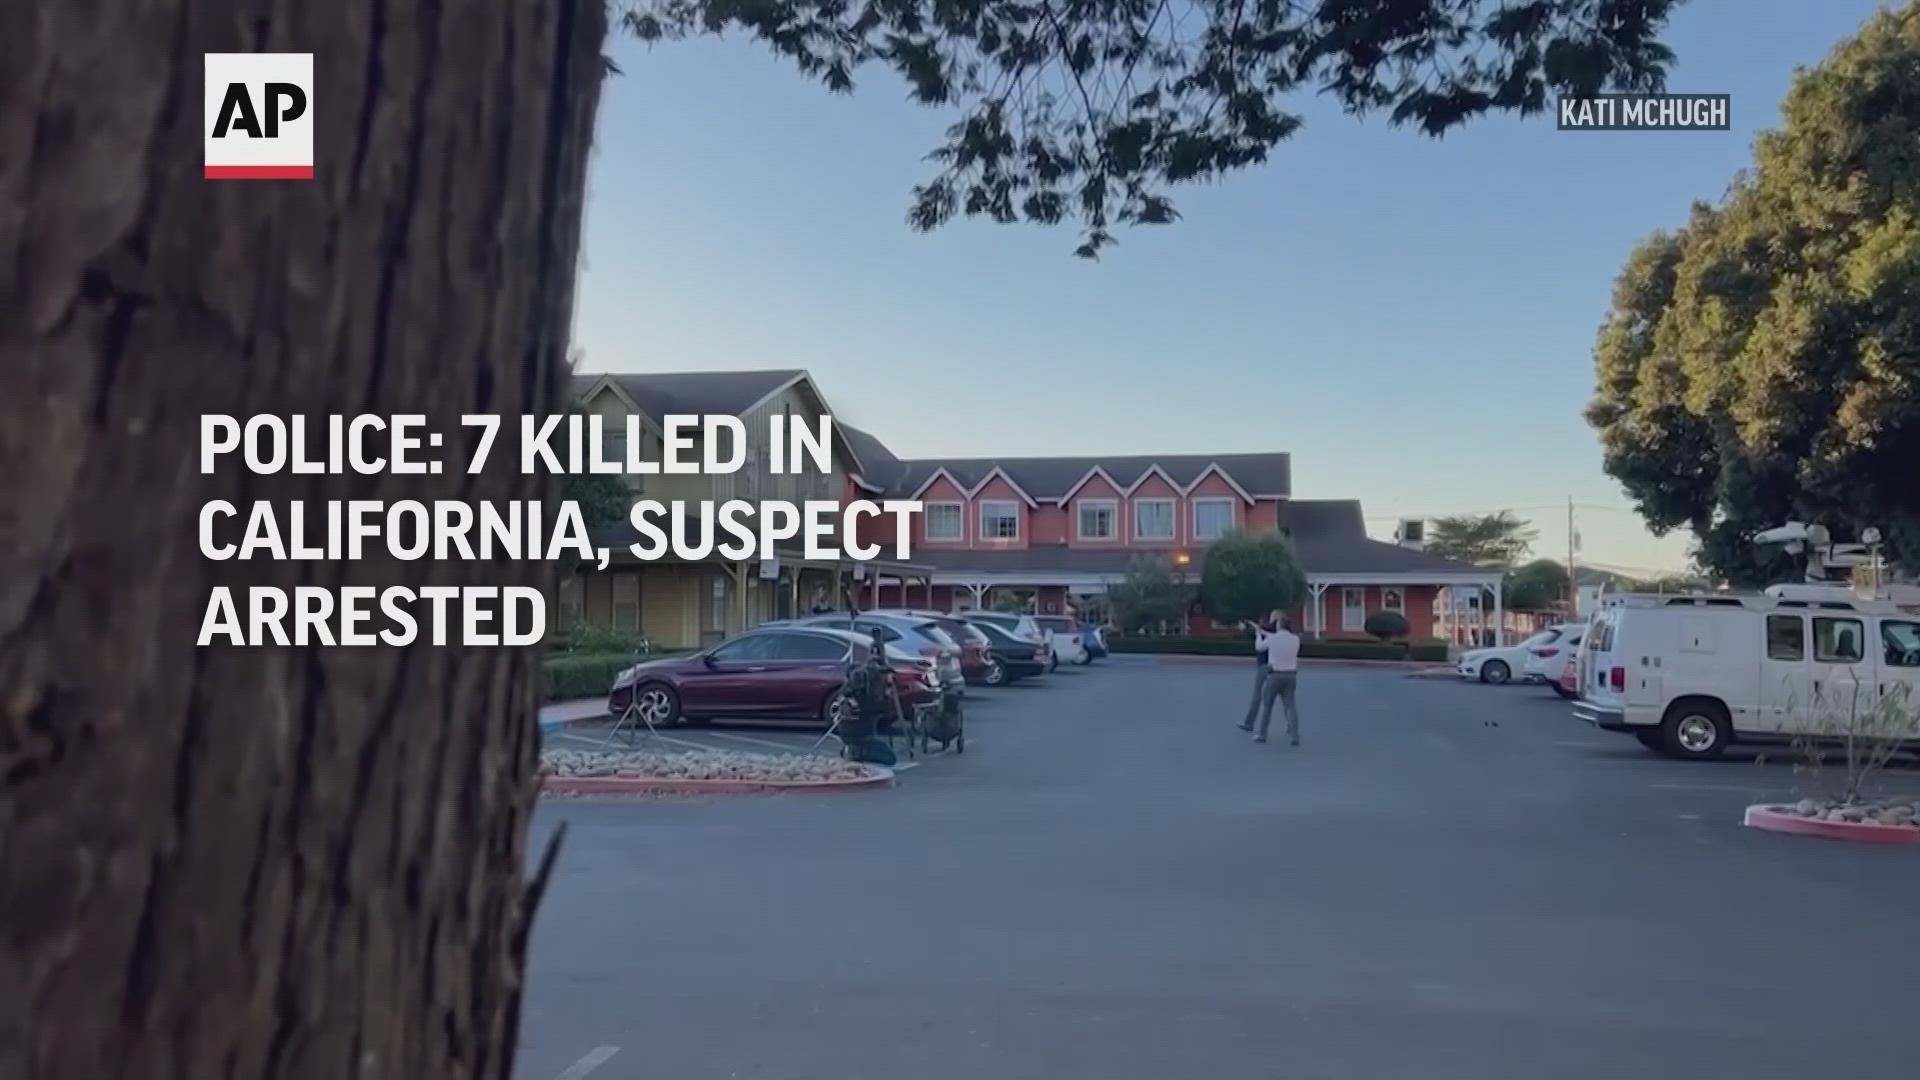 Seven people were killed in two related shootings at agricultural facilities in the community of Half Moon Bay near San Francisco.